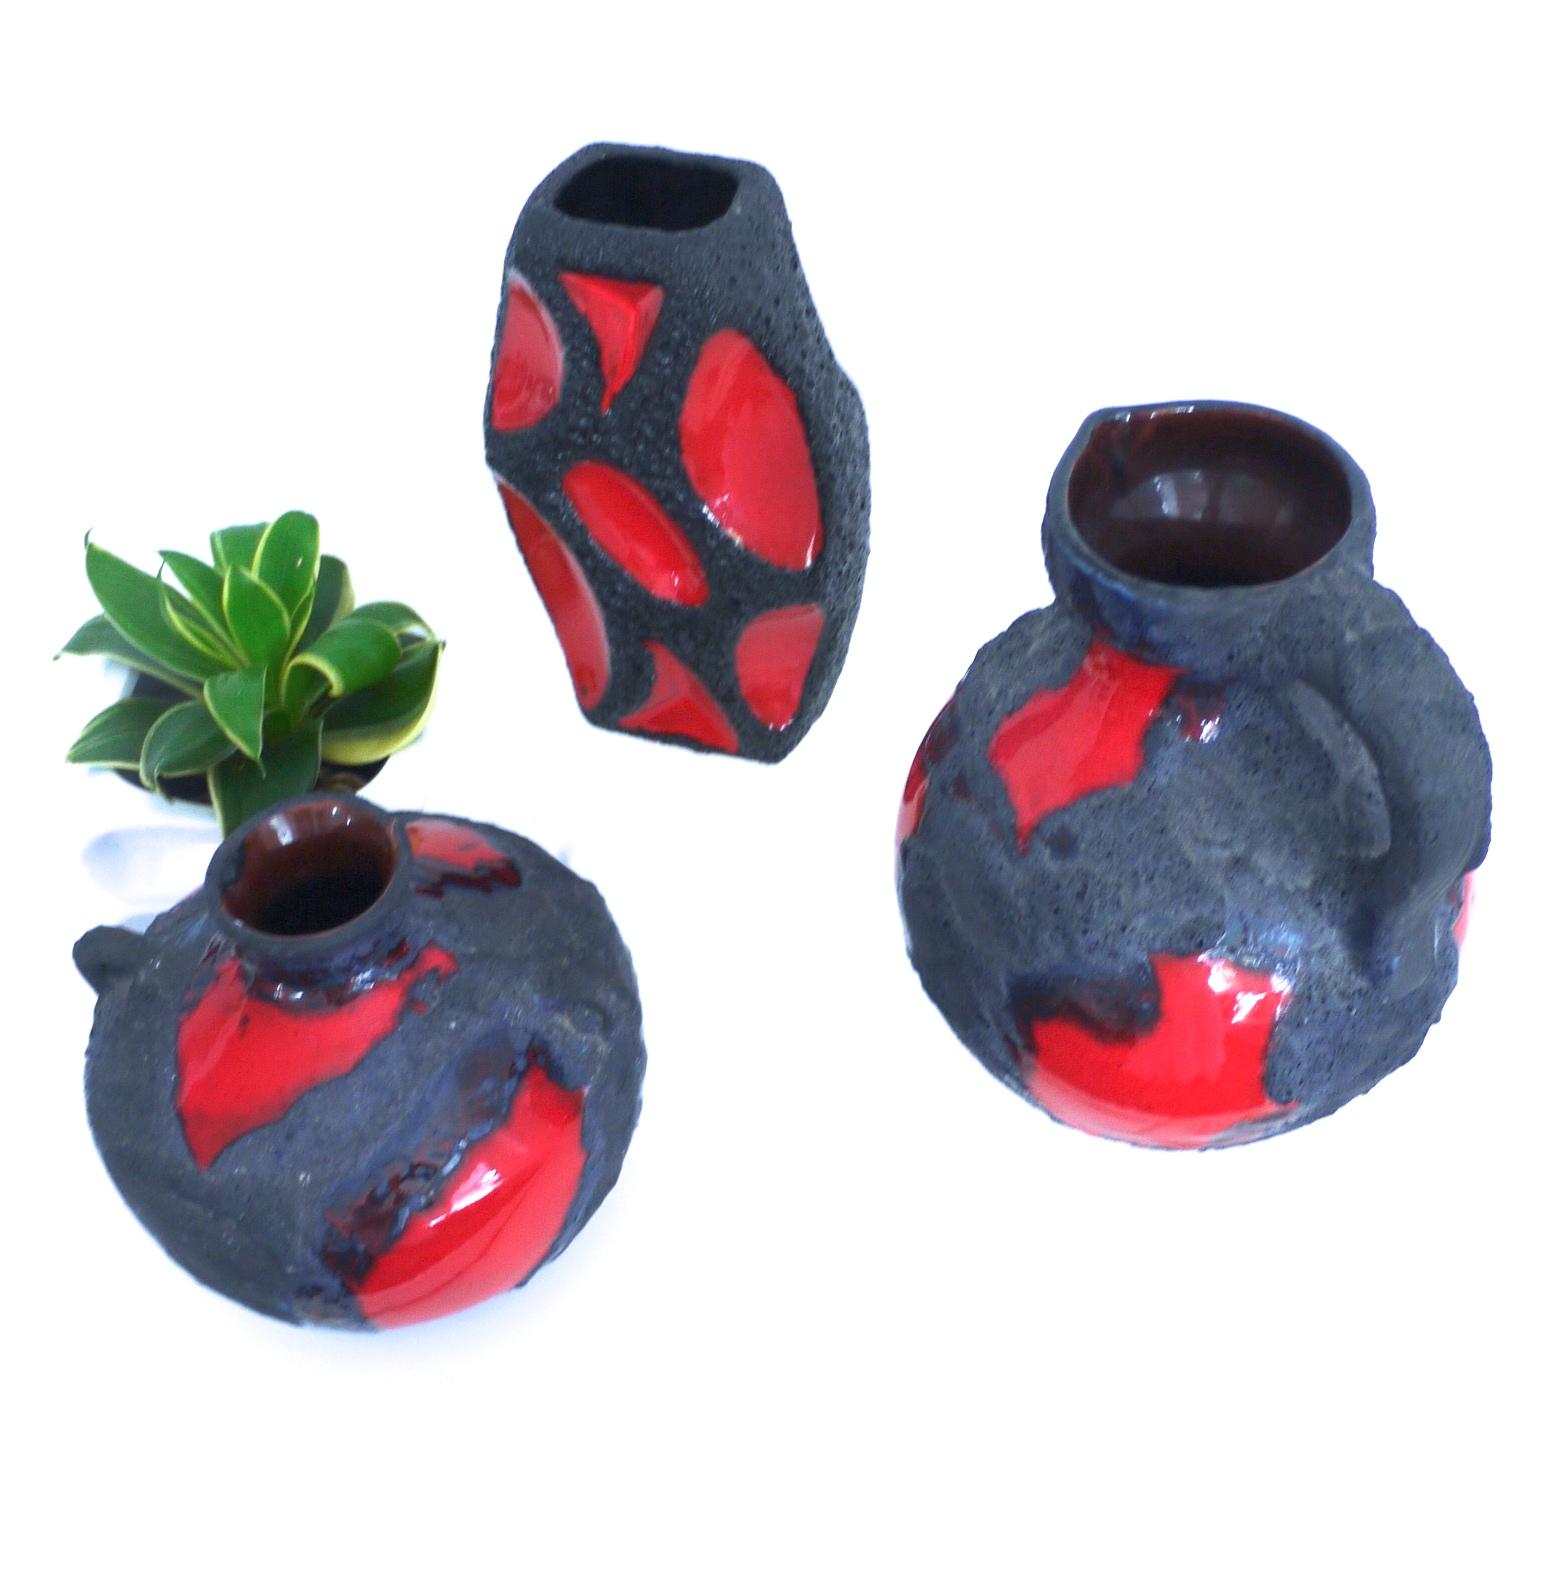 Modernist Fat Lava Space Age Collection of Ceramic Vases  by Roth/Marei 1970s For Sale 1